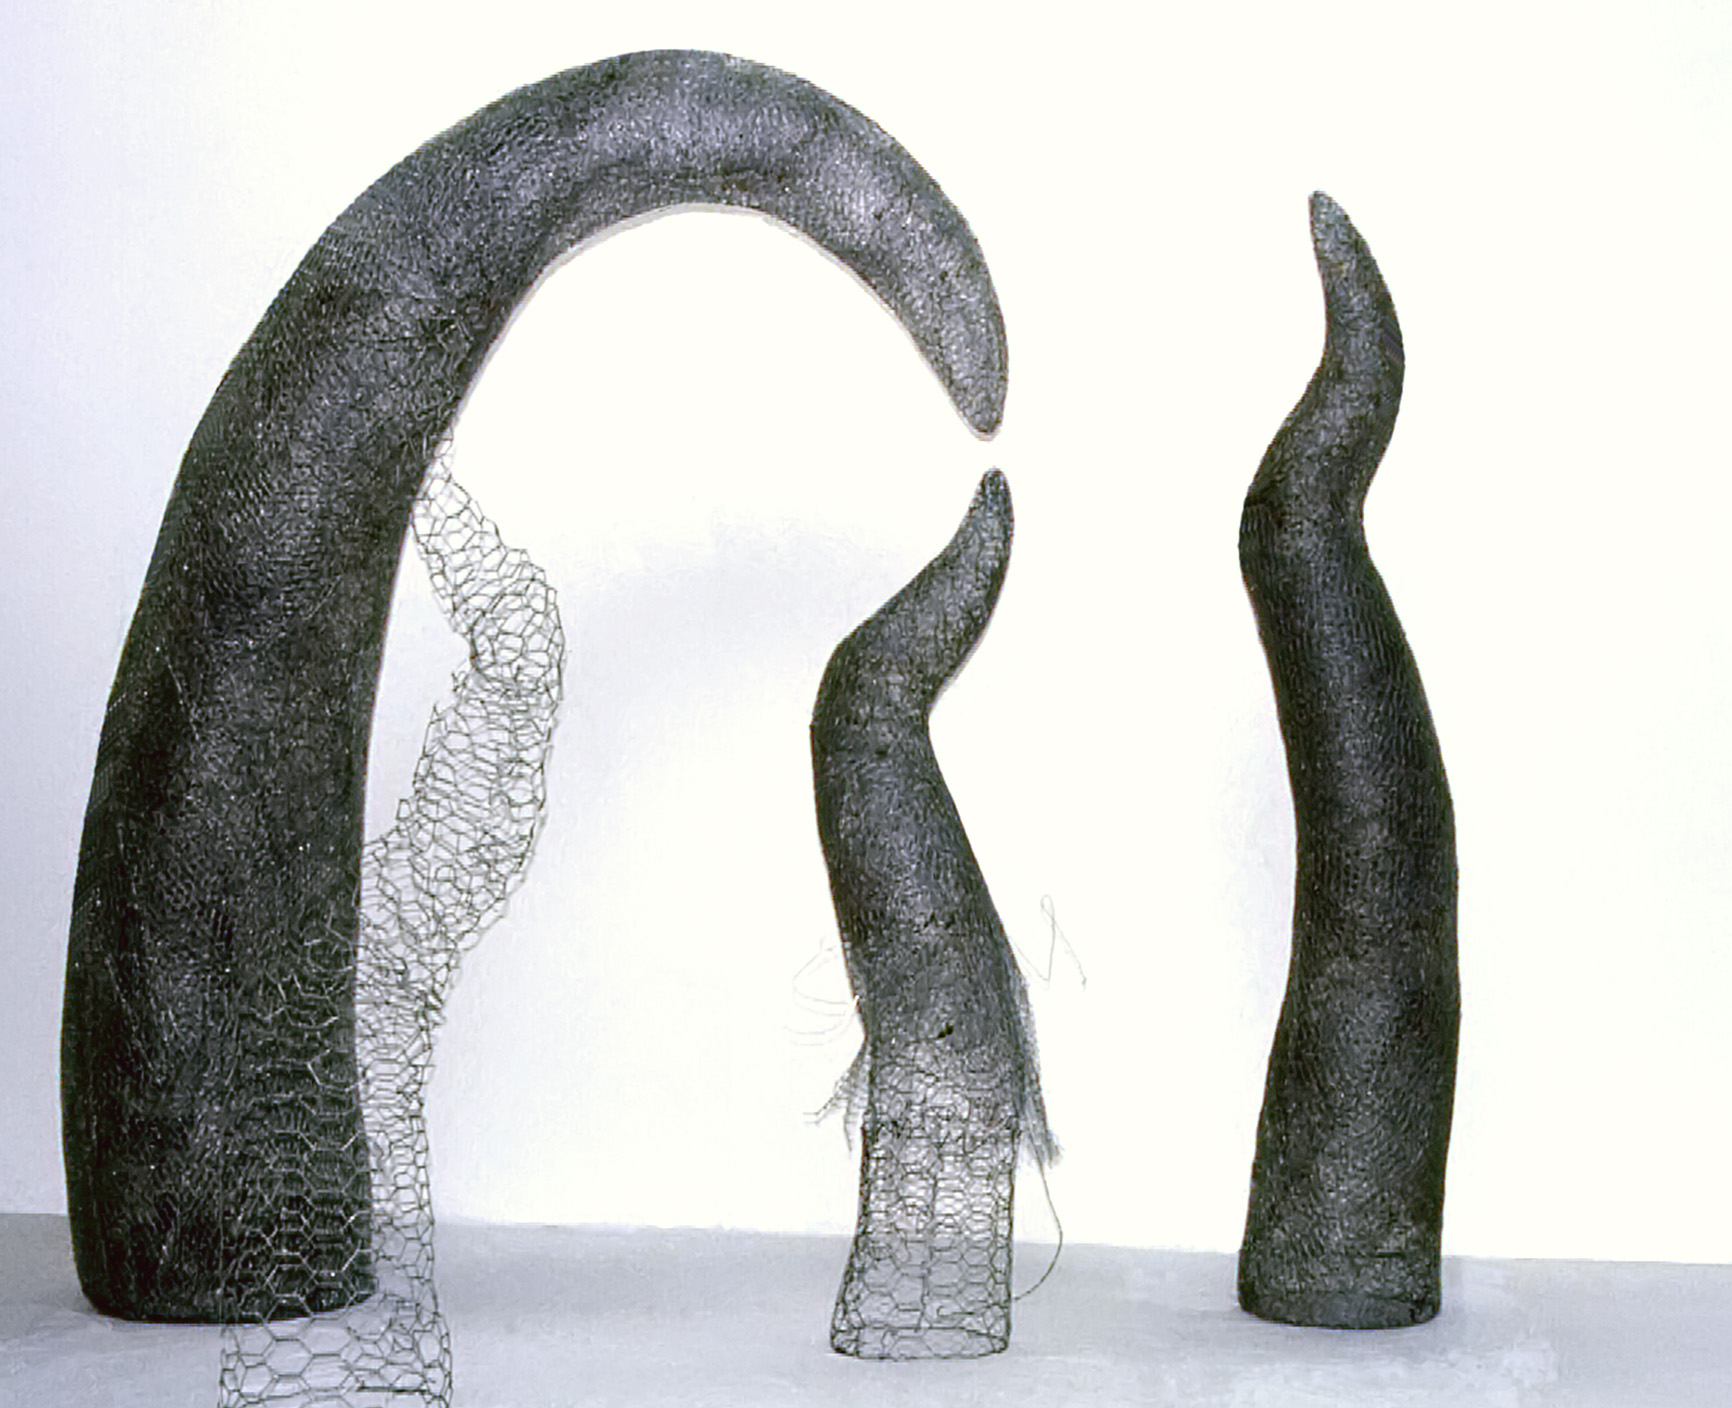 Four large sculptures made from chicken wire, representing family dynamics, each at differing stages of maturity